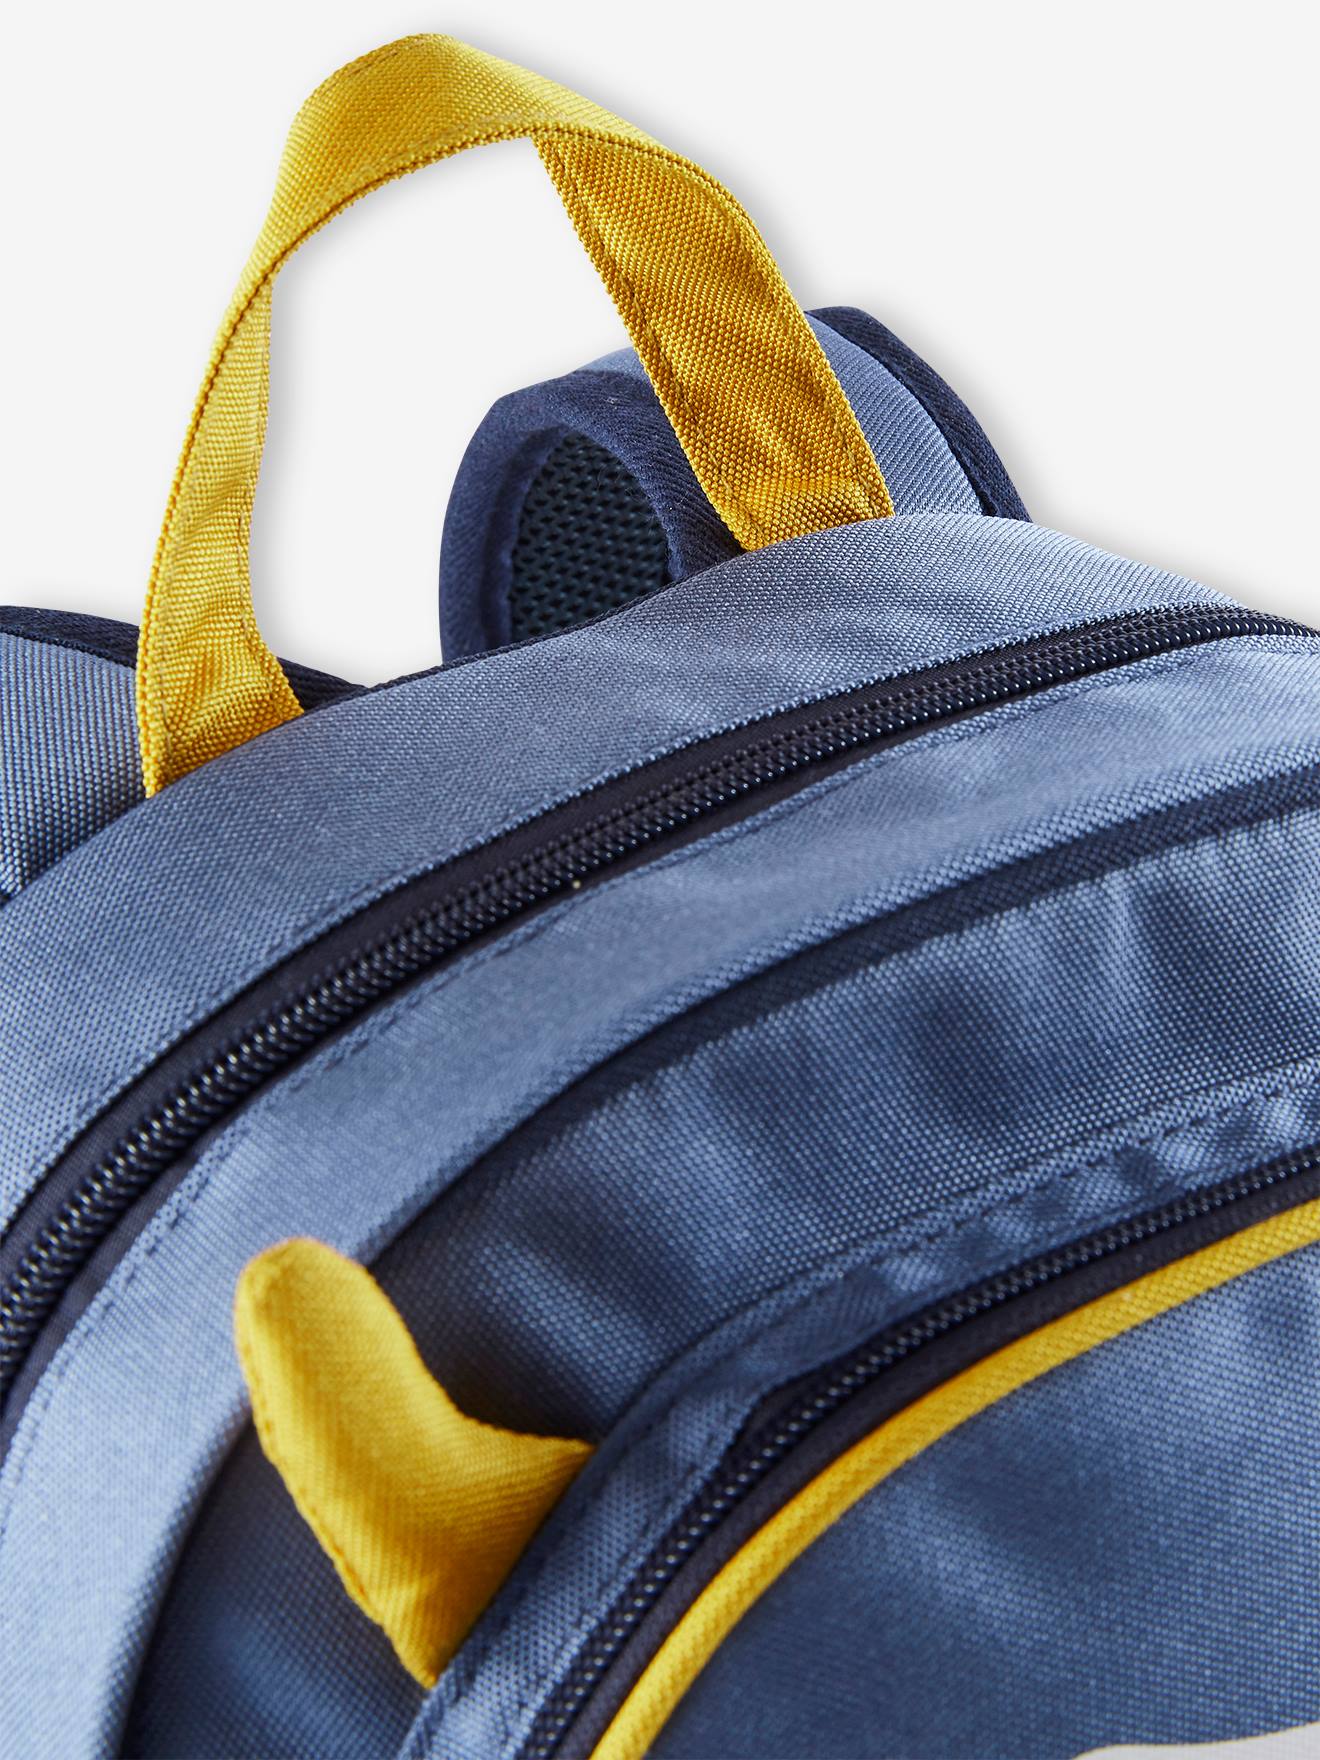 with　Backpack,　Details　in　design,　medium　blue　Boys　Relief,　for　